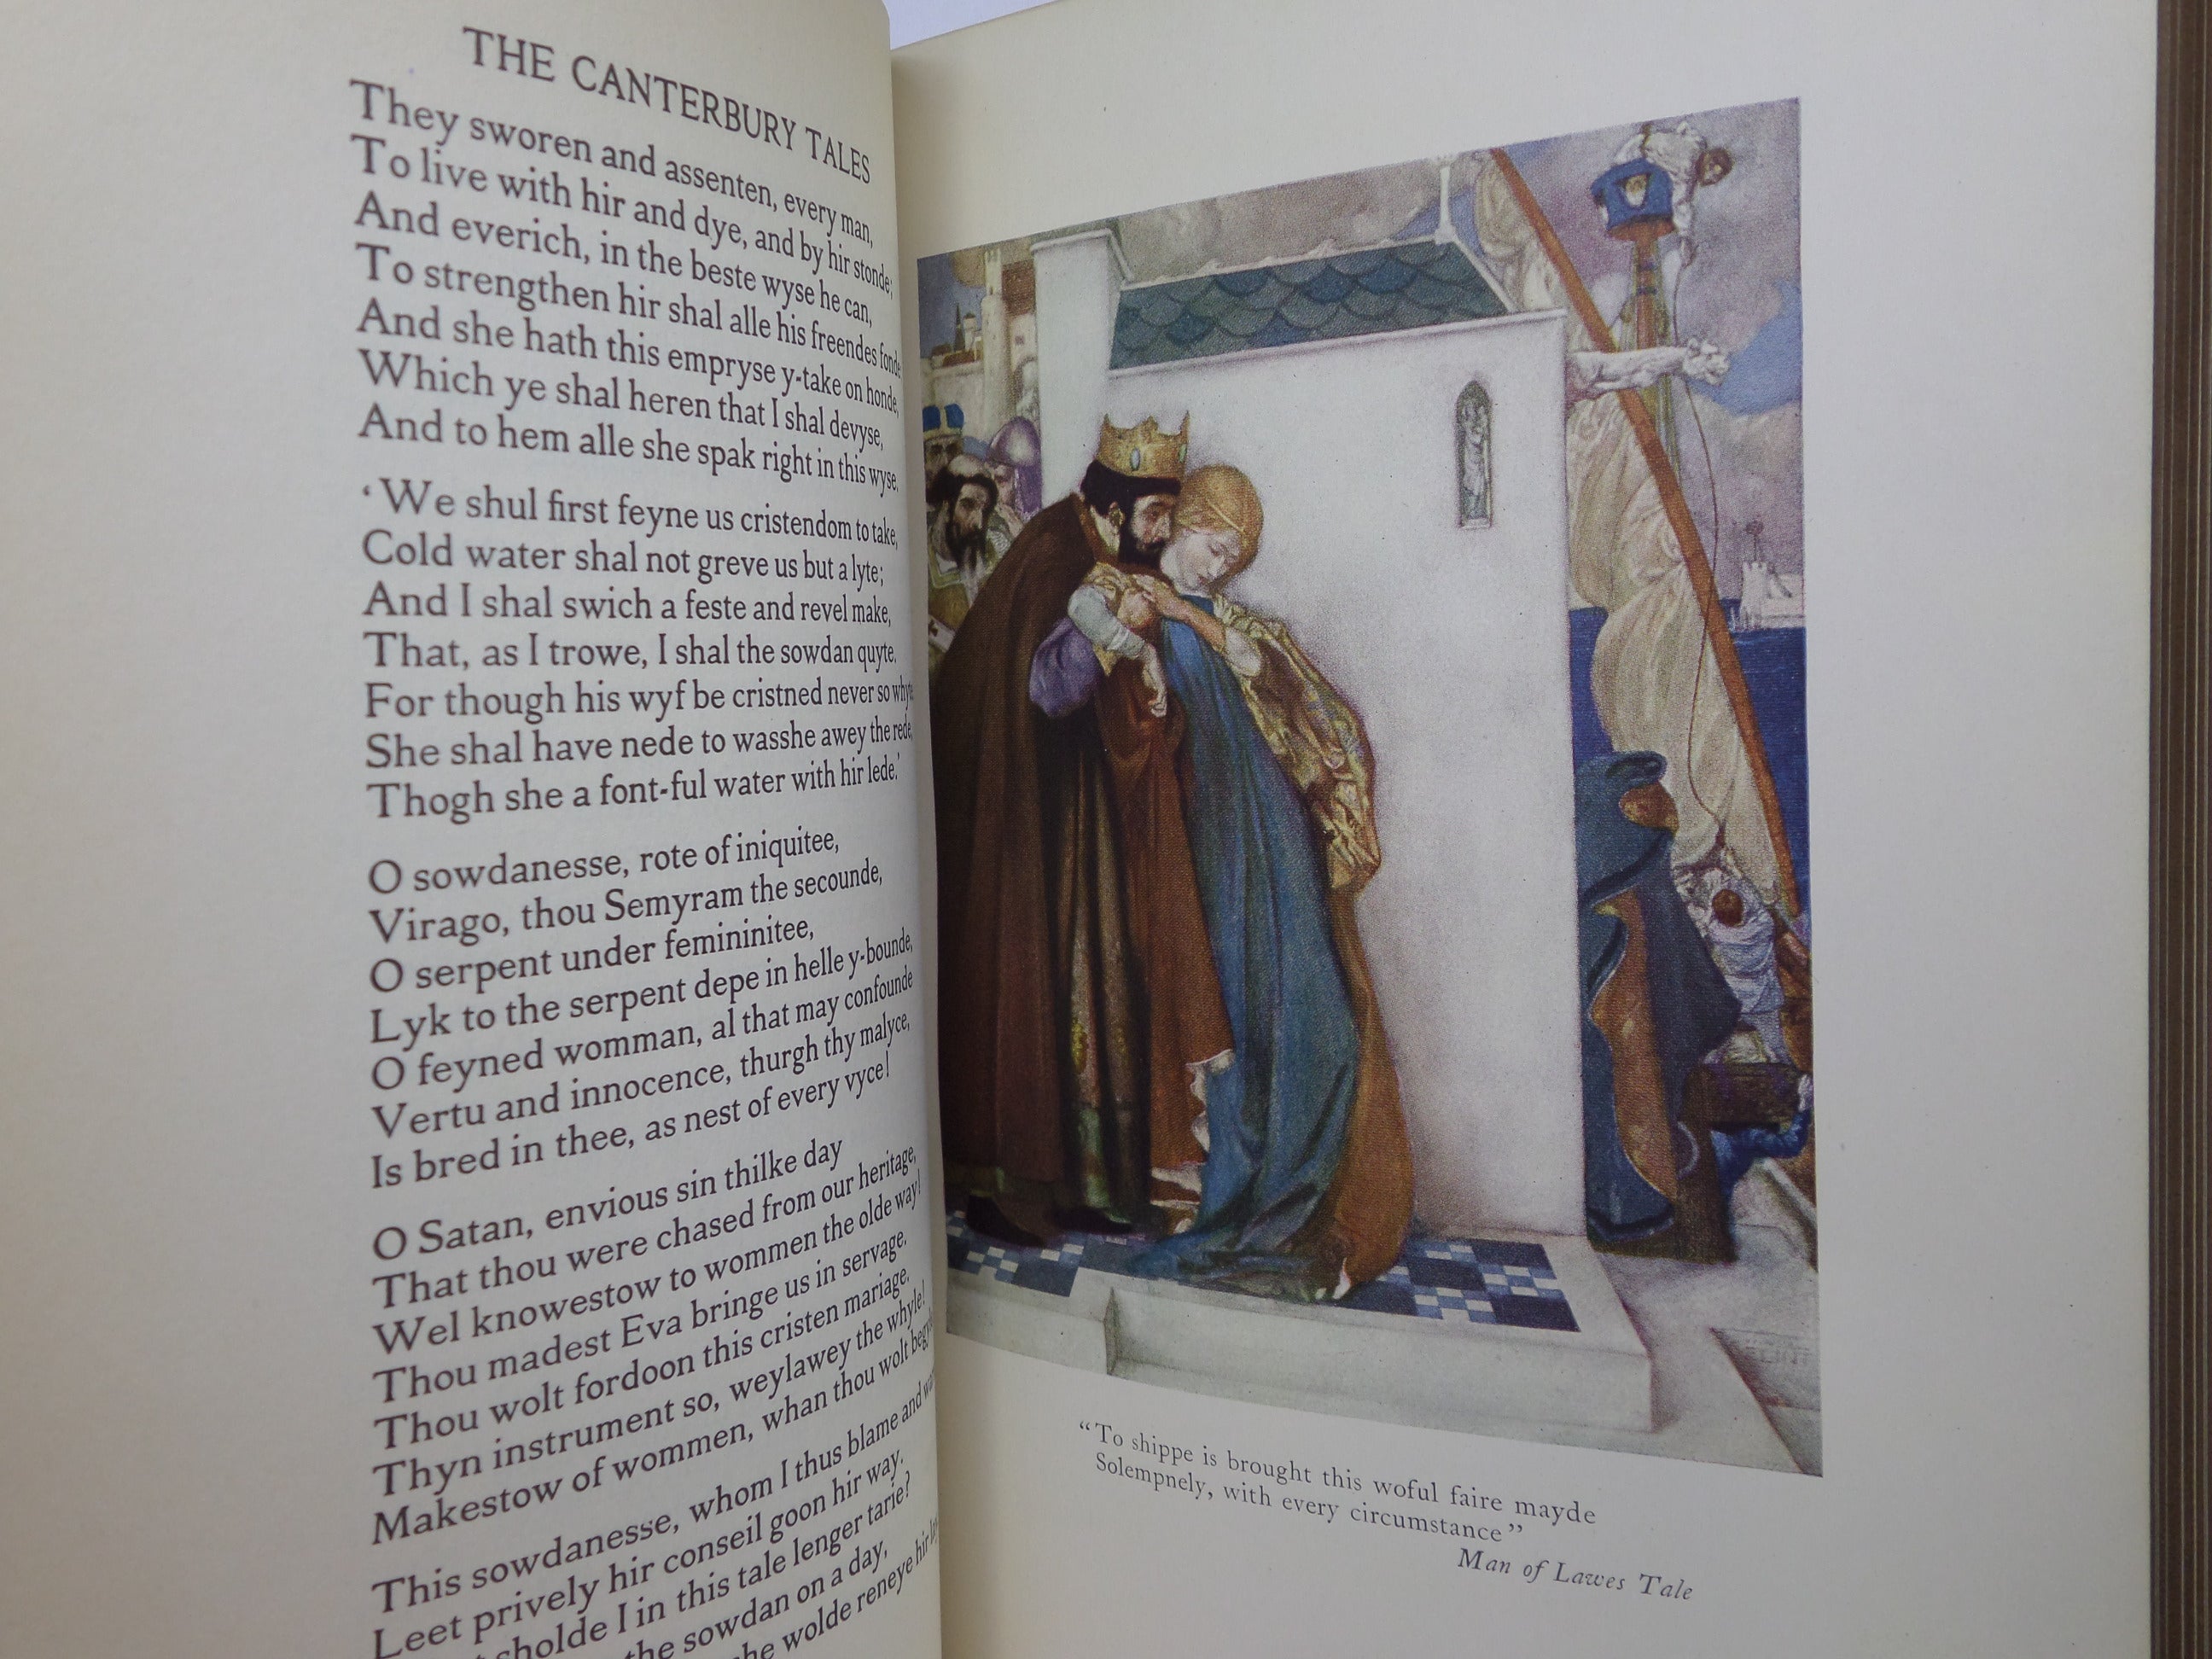 THE CANTERBURY TALES OF GEOFFREY CHAUCER 1928 FINE RIVIERE BINDING, ILLUSTRATED